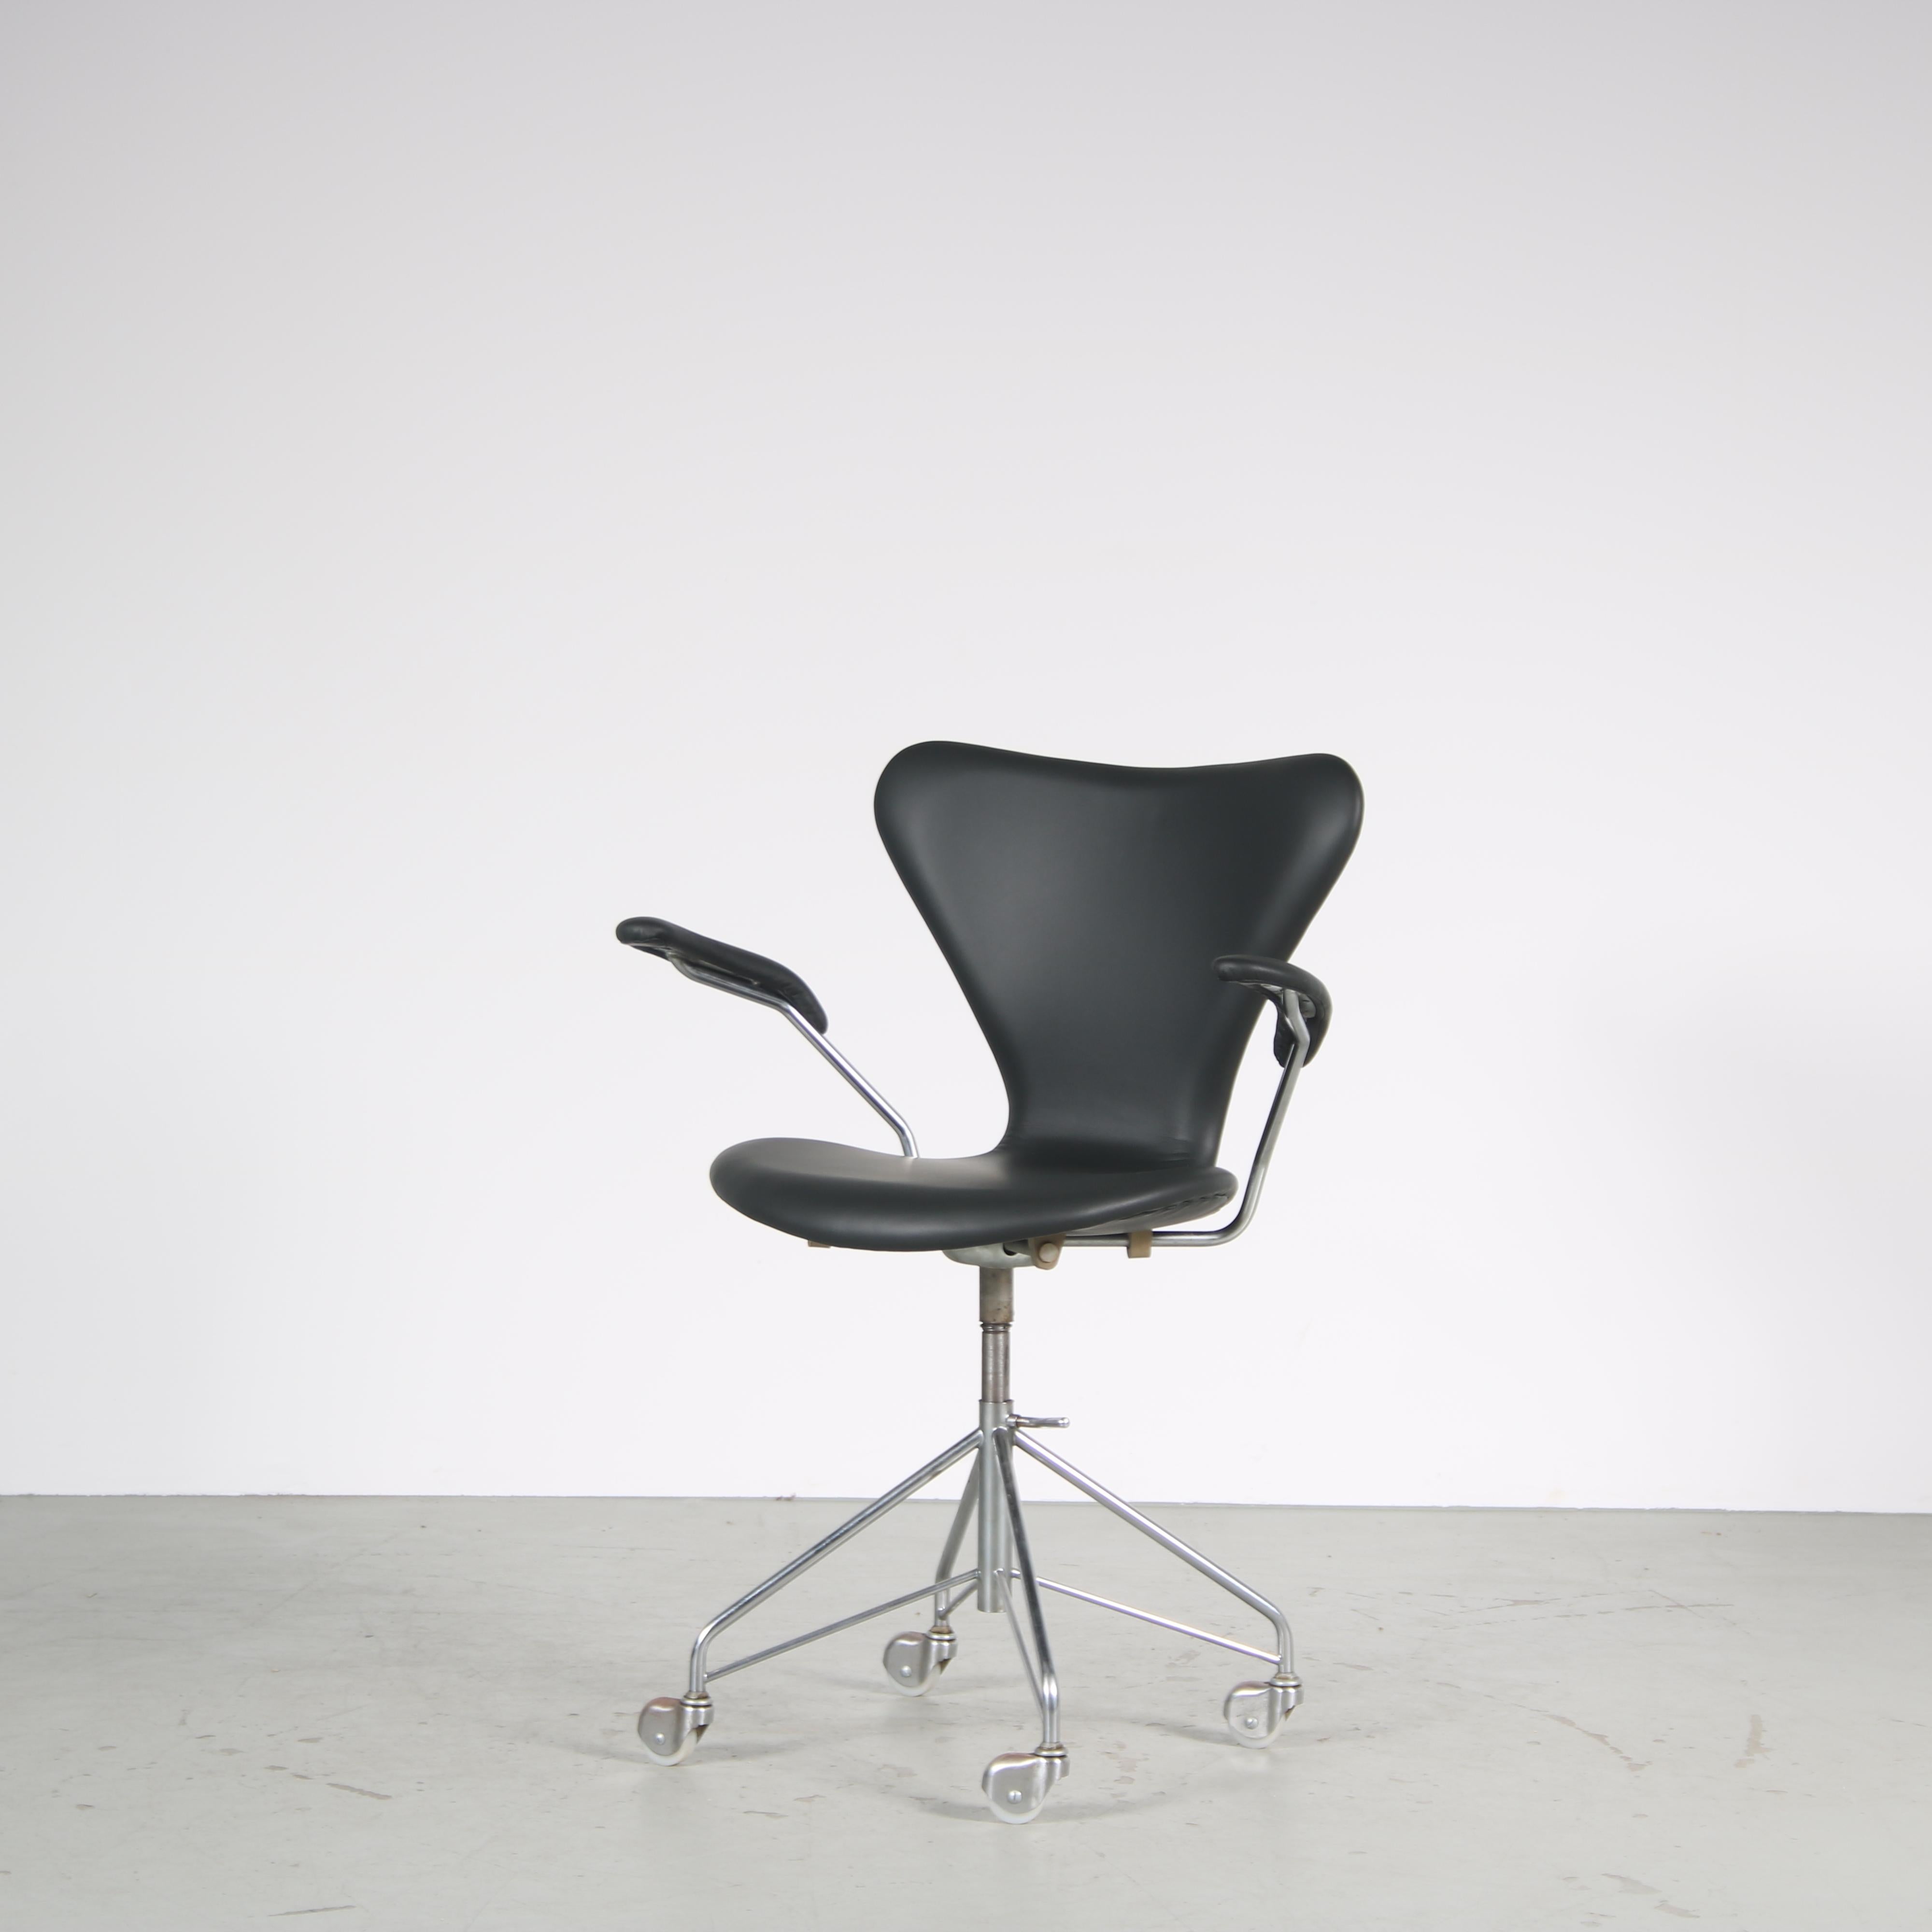 A beautiful swivel desk chair, model “3217”, designed by Arne Jacobsen and manufactured by Fritz Hansen in Denmark around 1960.

This highly recognizable piece has a chrome plated tubular metal base on wheels. The rounded design of the seat gives it